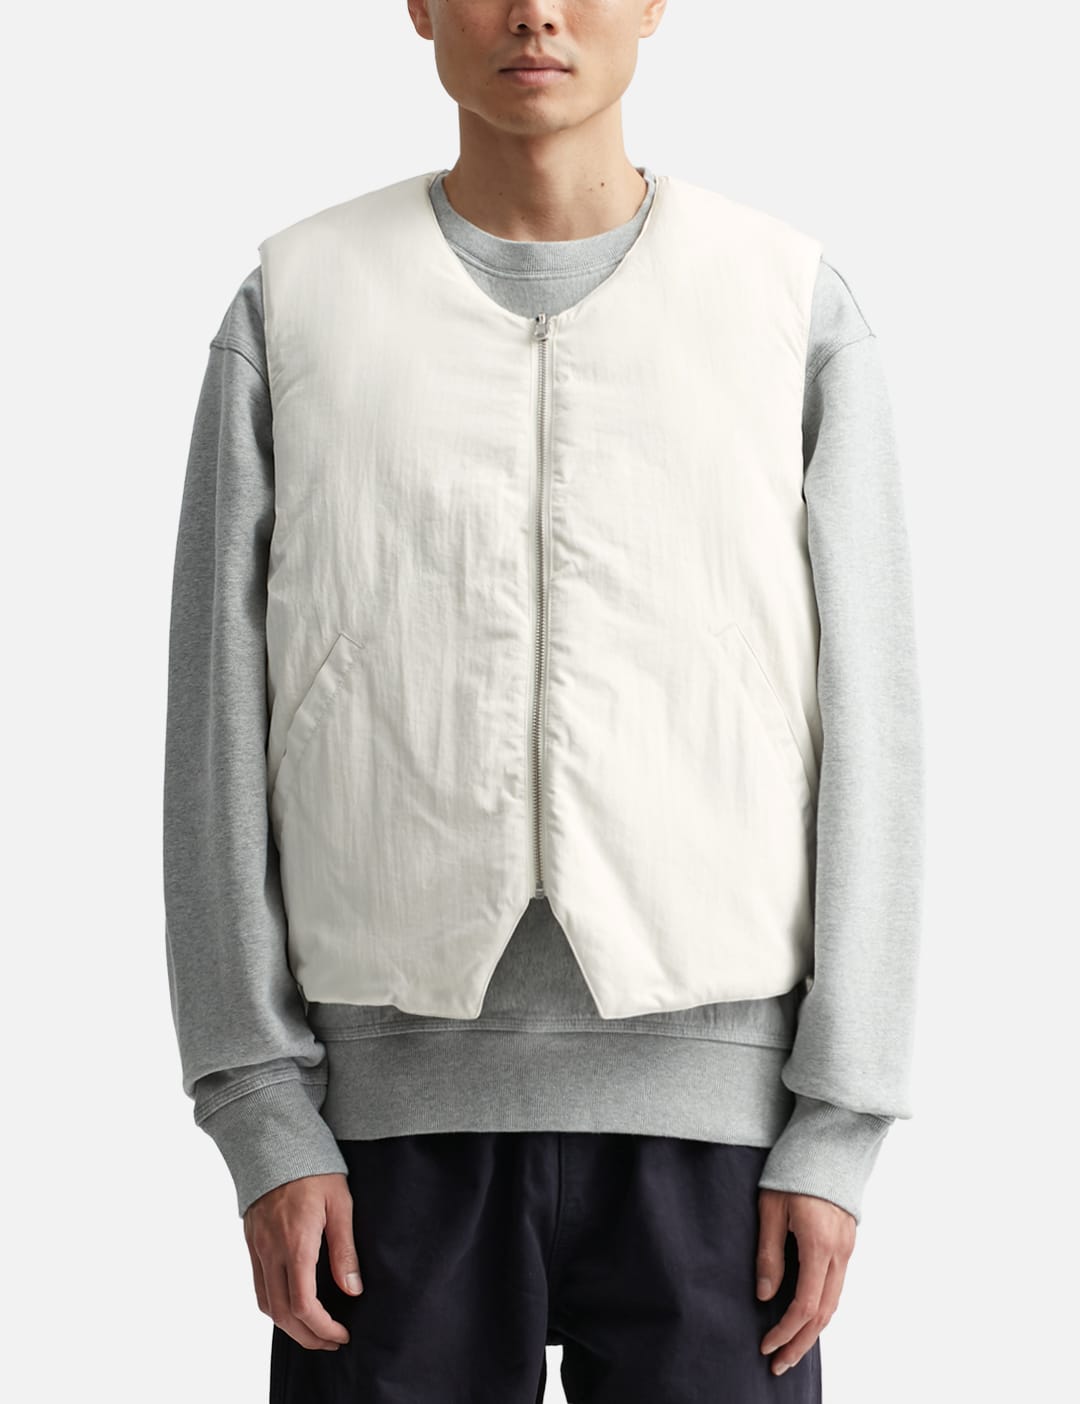 Stüssy - Reversible Quilted Vest | HBX - Globally Curated Fashion 